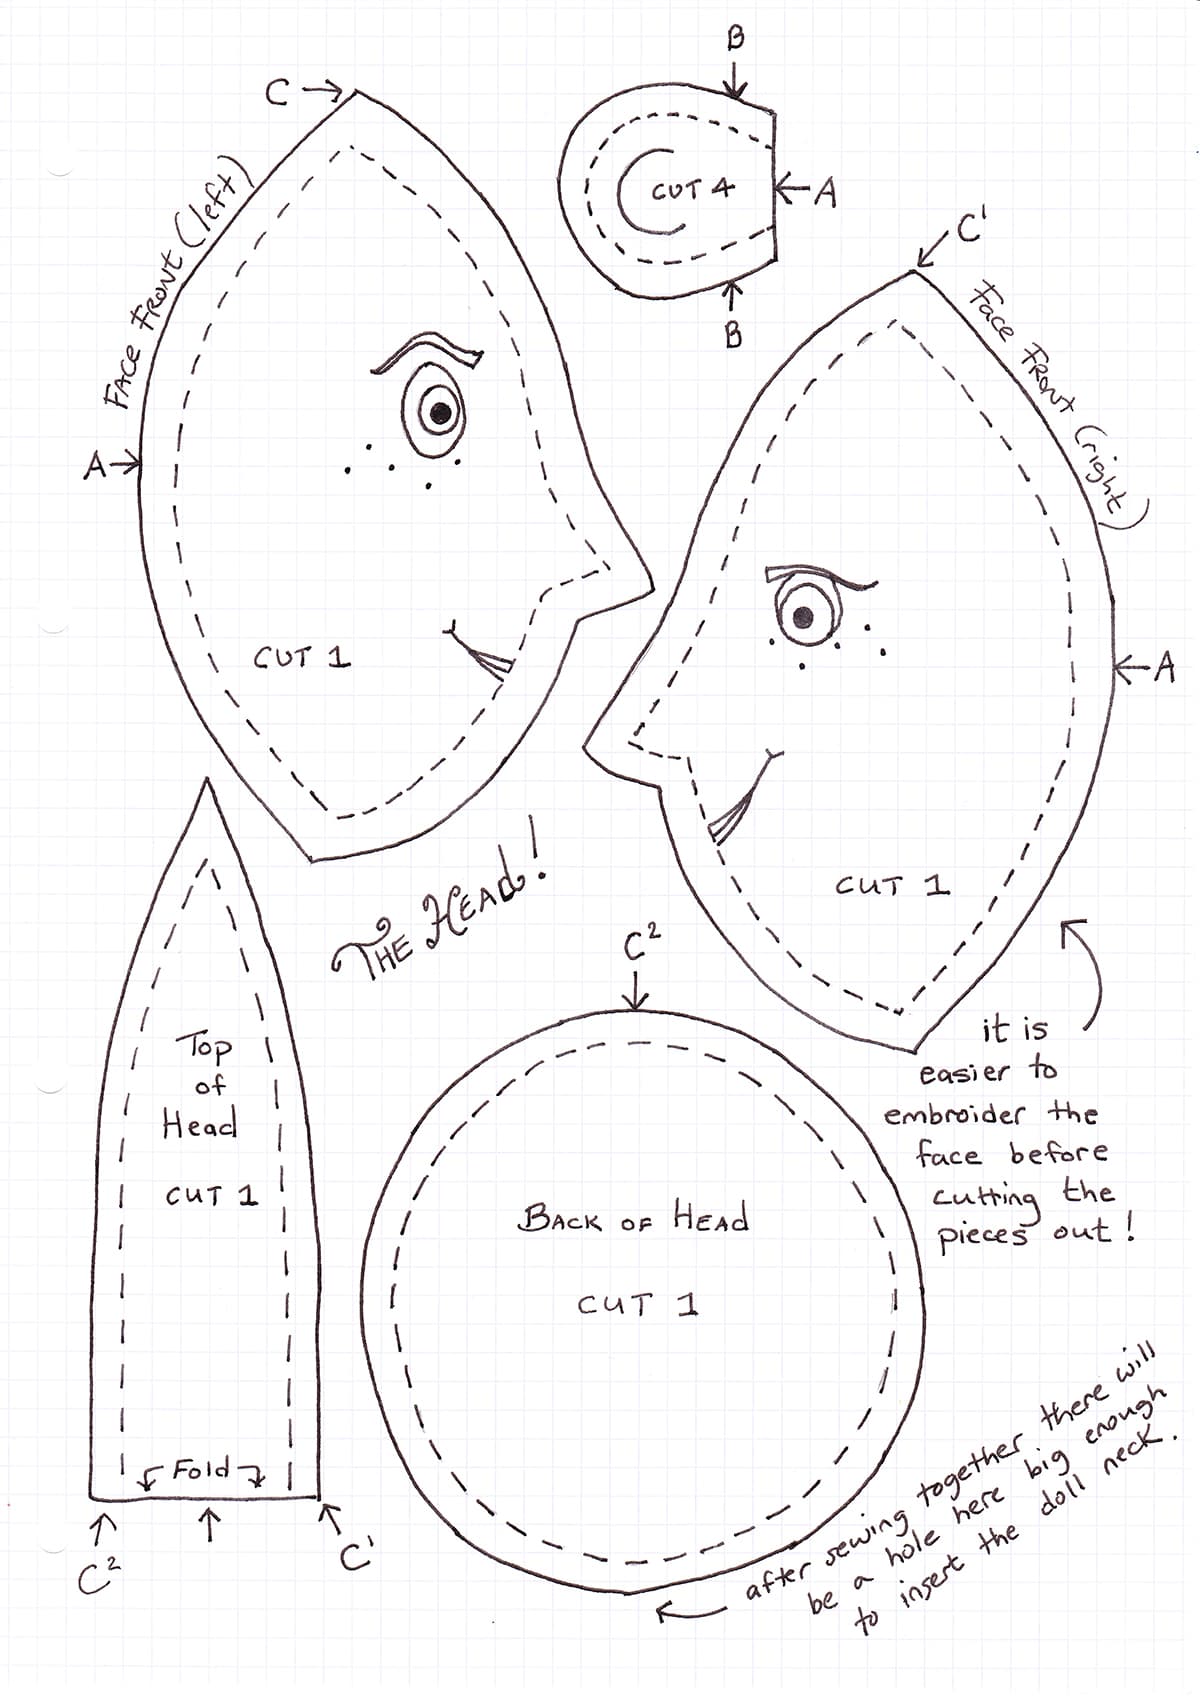 Image of the pattern to make the head for a fabric Coraline doll.